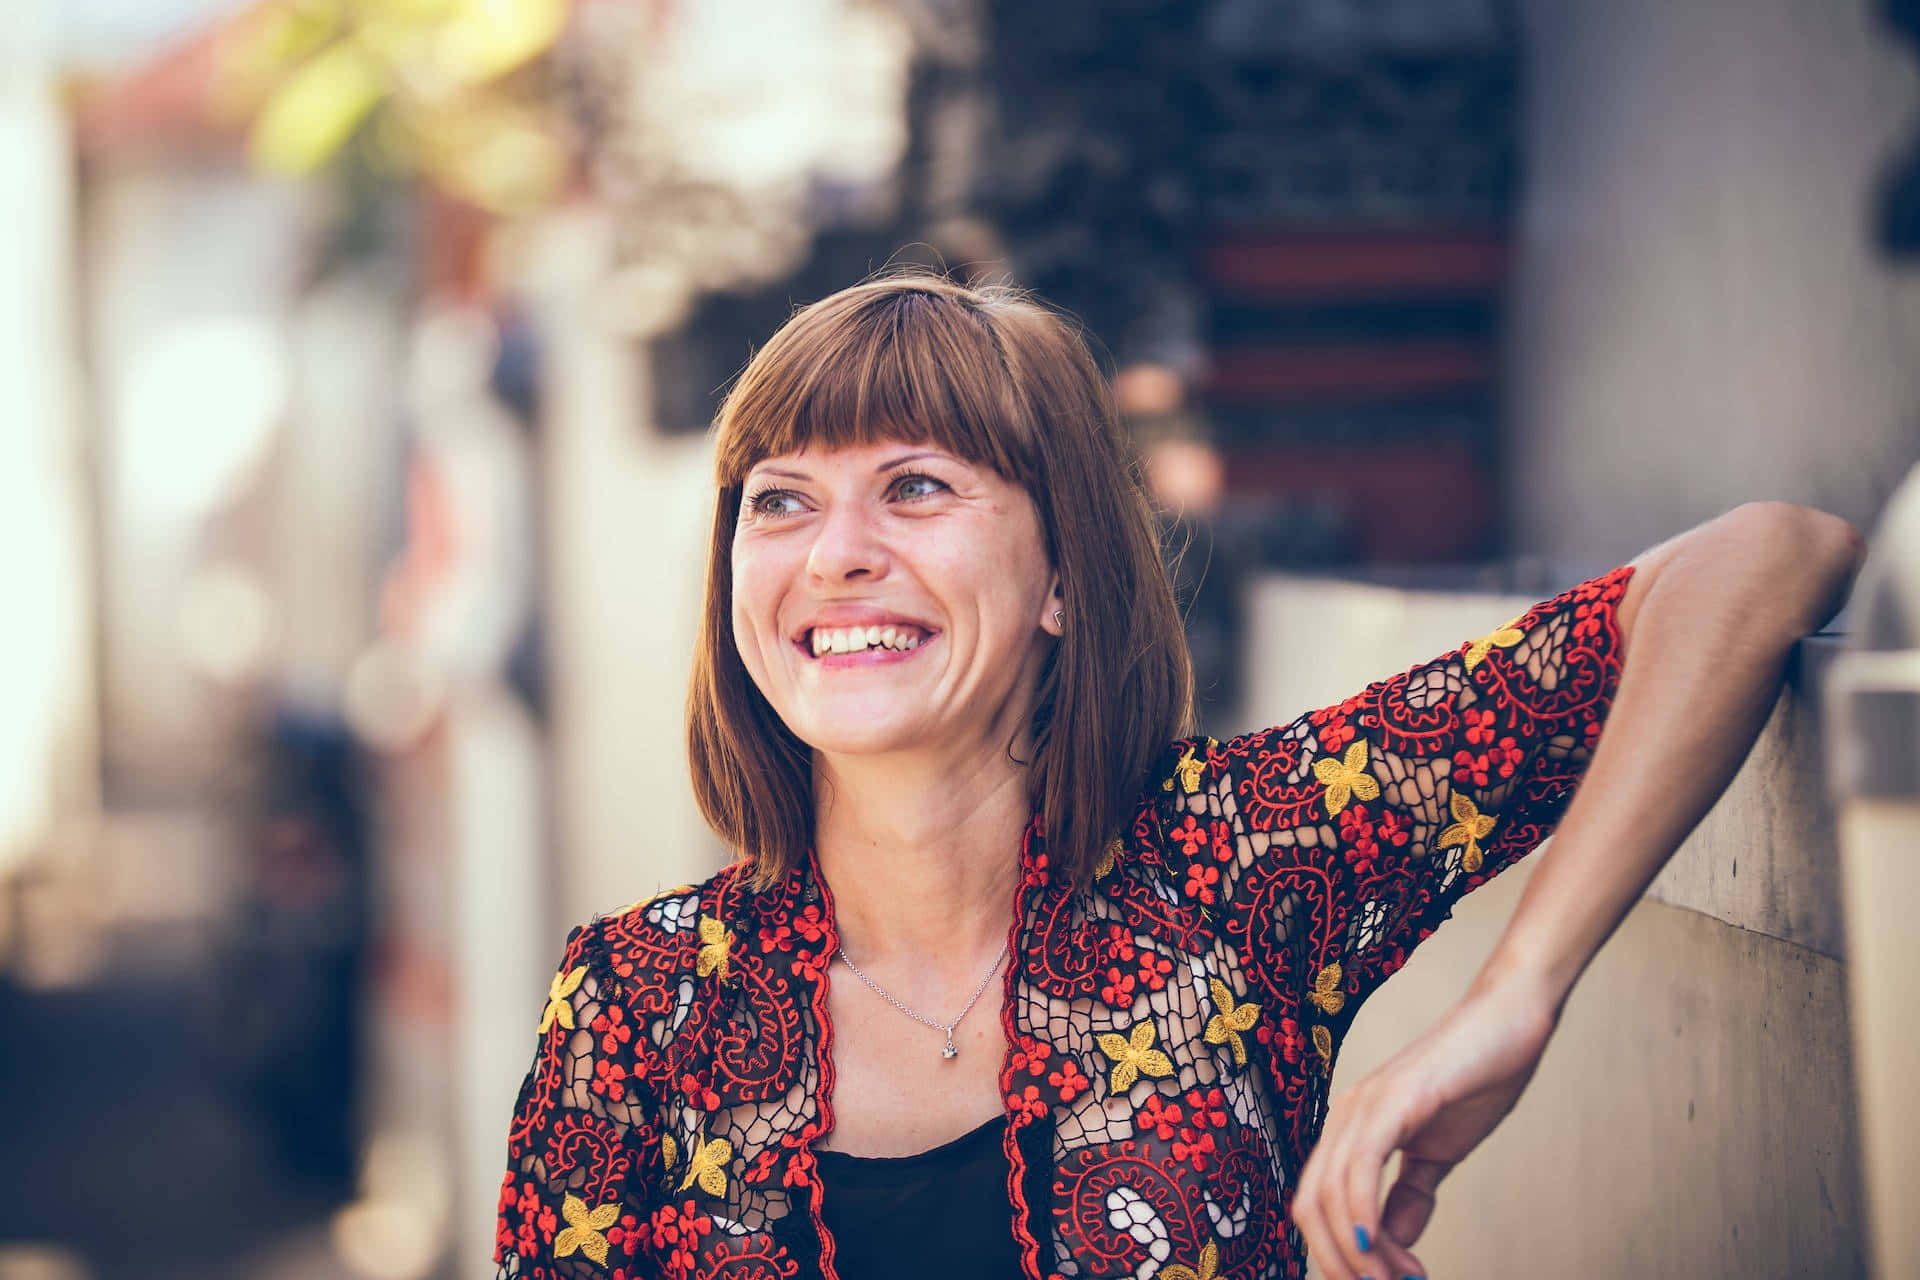 Middle Aged Woman With Bangs Smile Picture